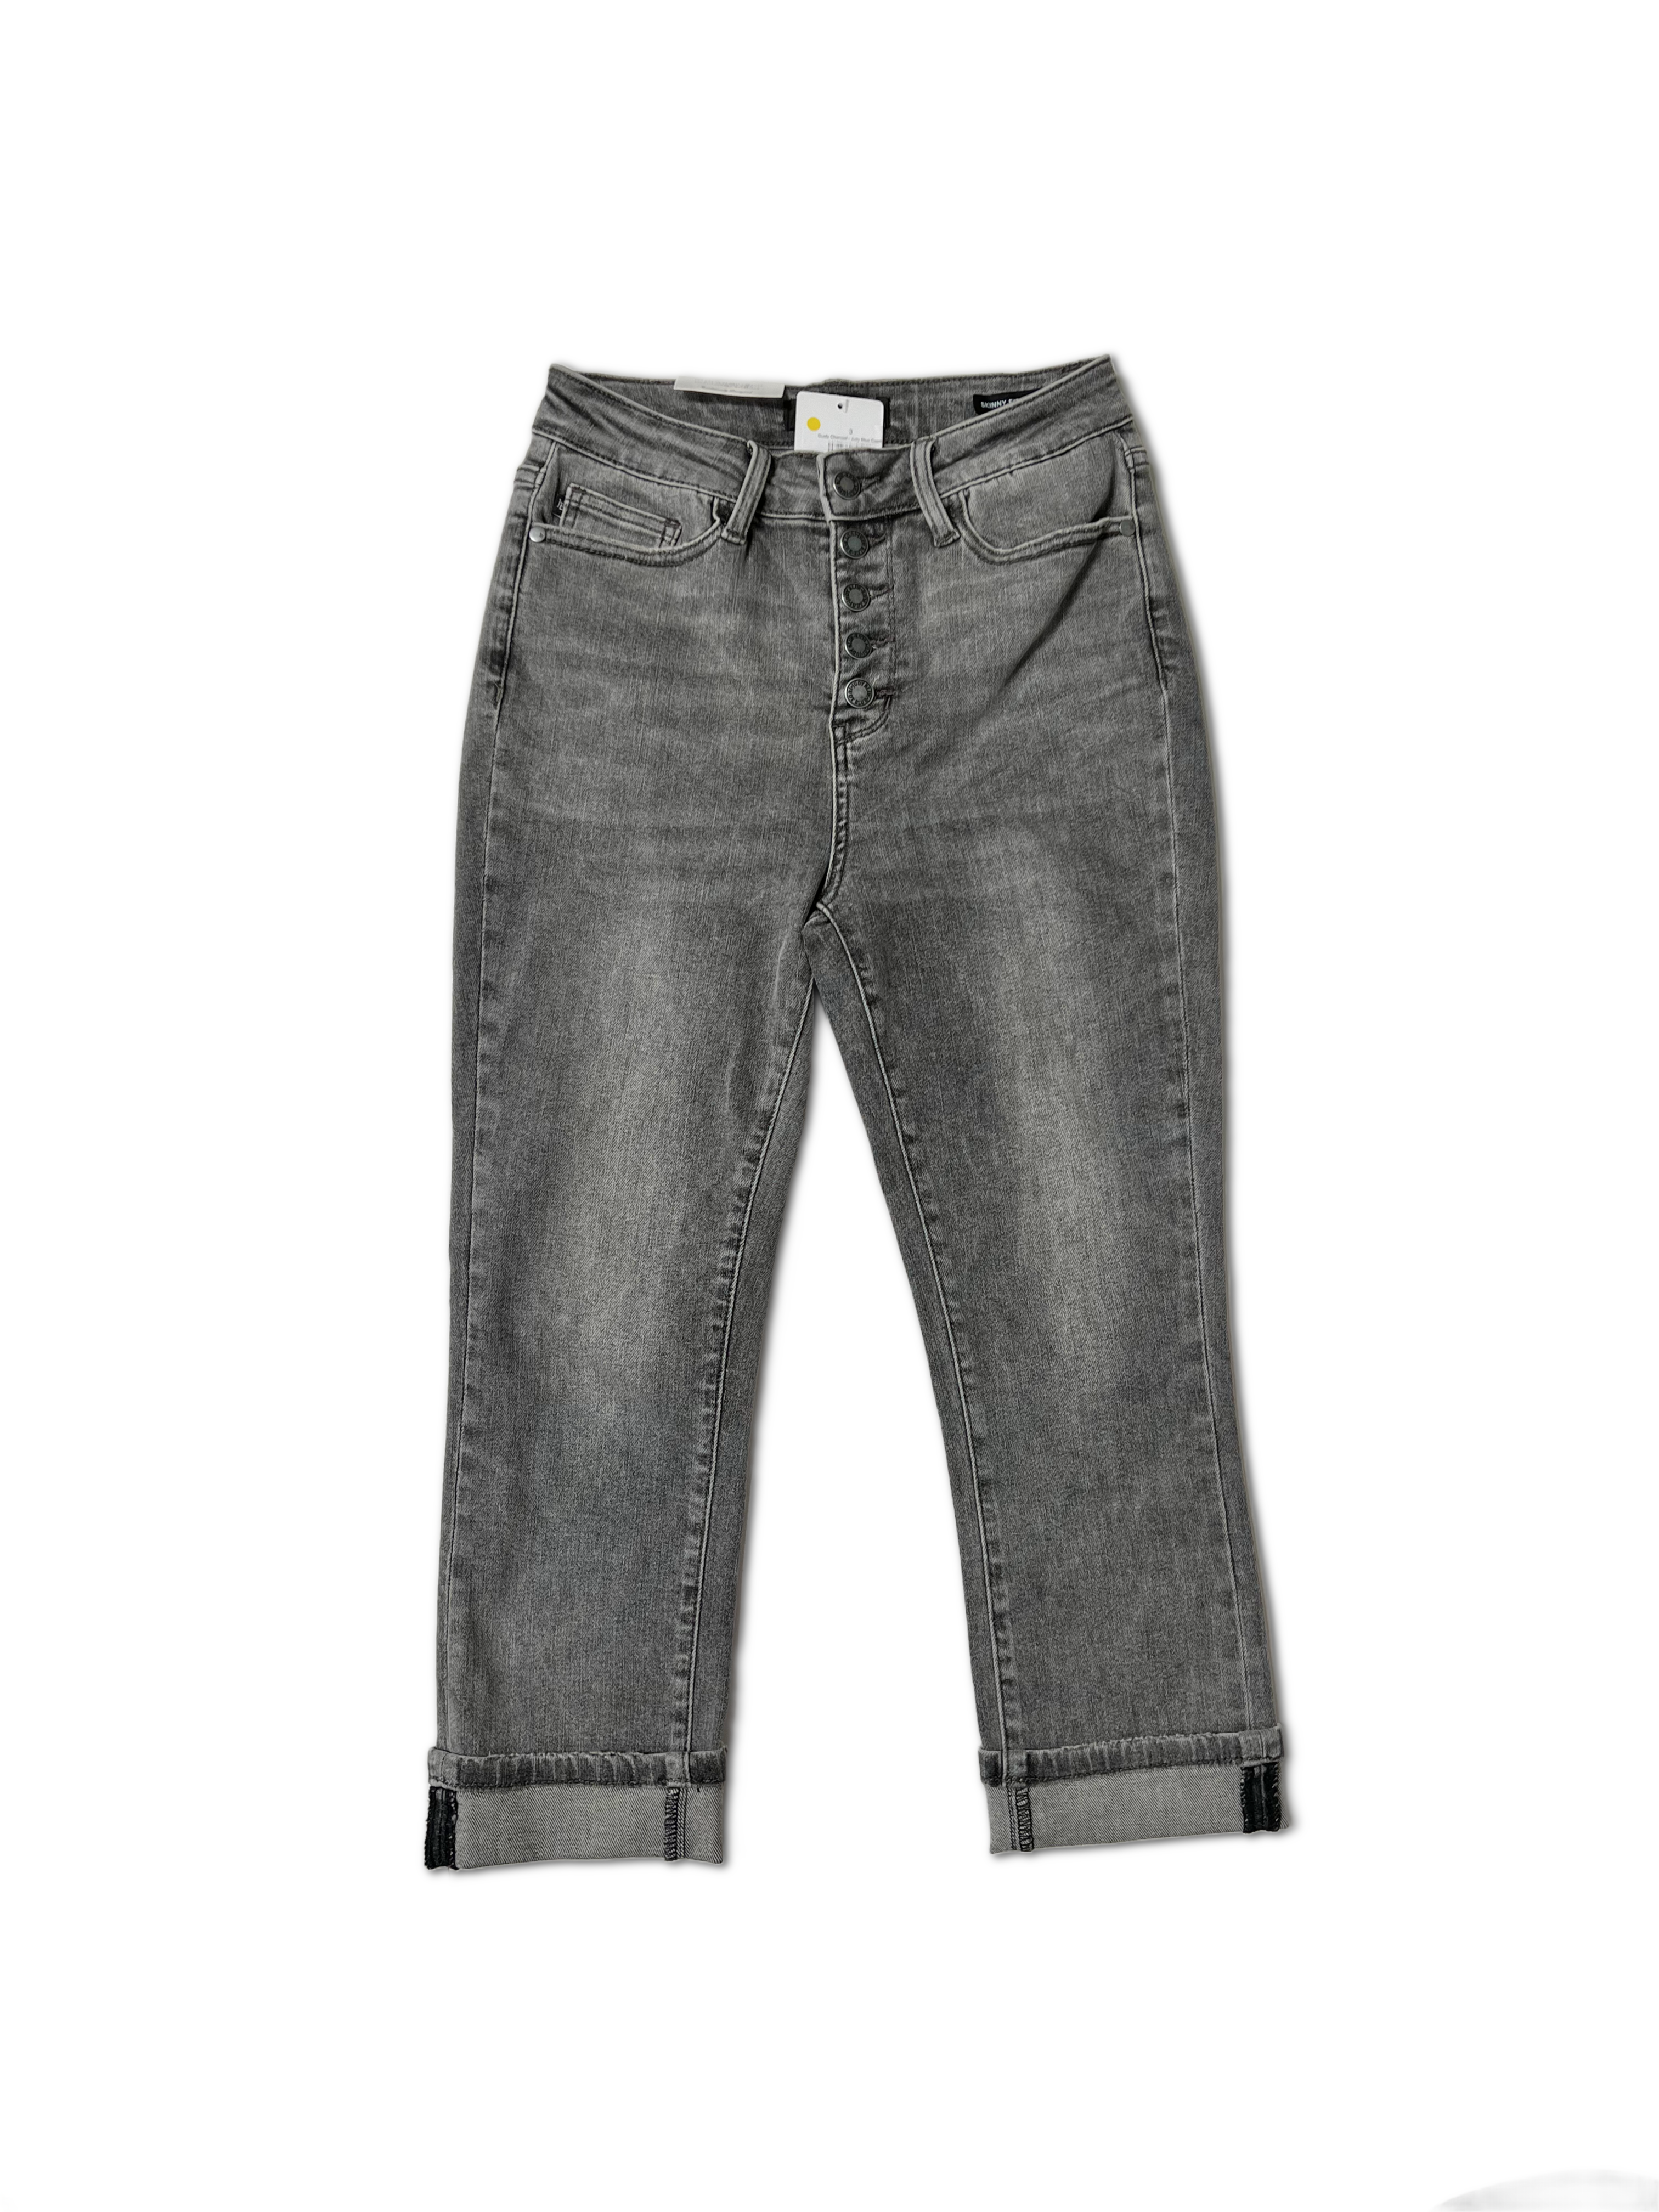 A pair of Dusty Charcoal - Judy Blue Capris by JB Boutique Simplified, high-waisted with a button fly. These non-distressed jeans feature a slight fading effect and are cuffed at the ankles. They are laid flat on a white background, showcasing the front view and pocket details.